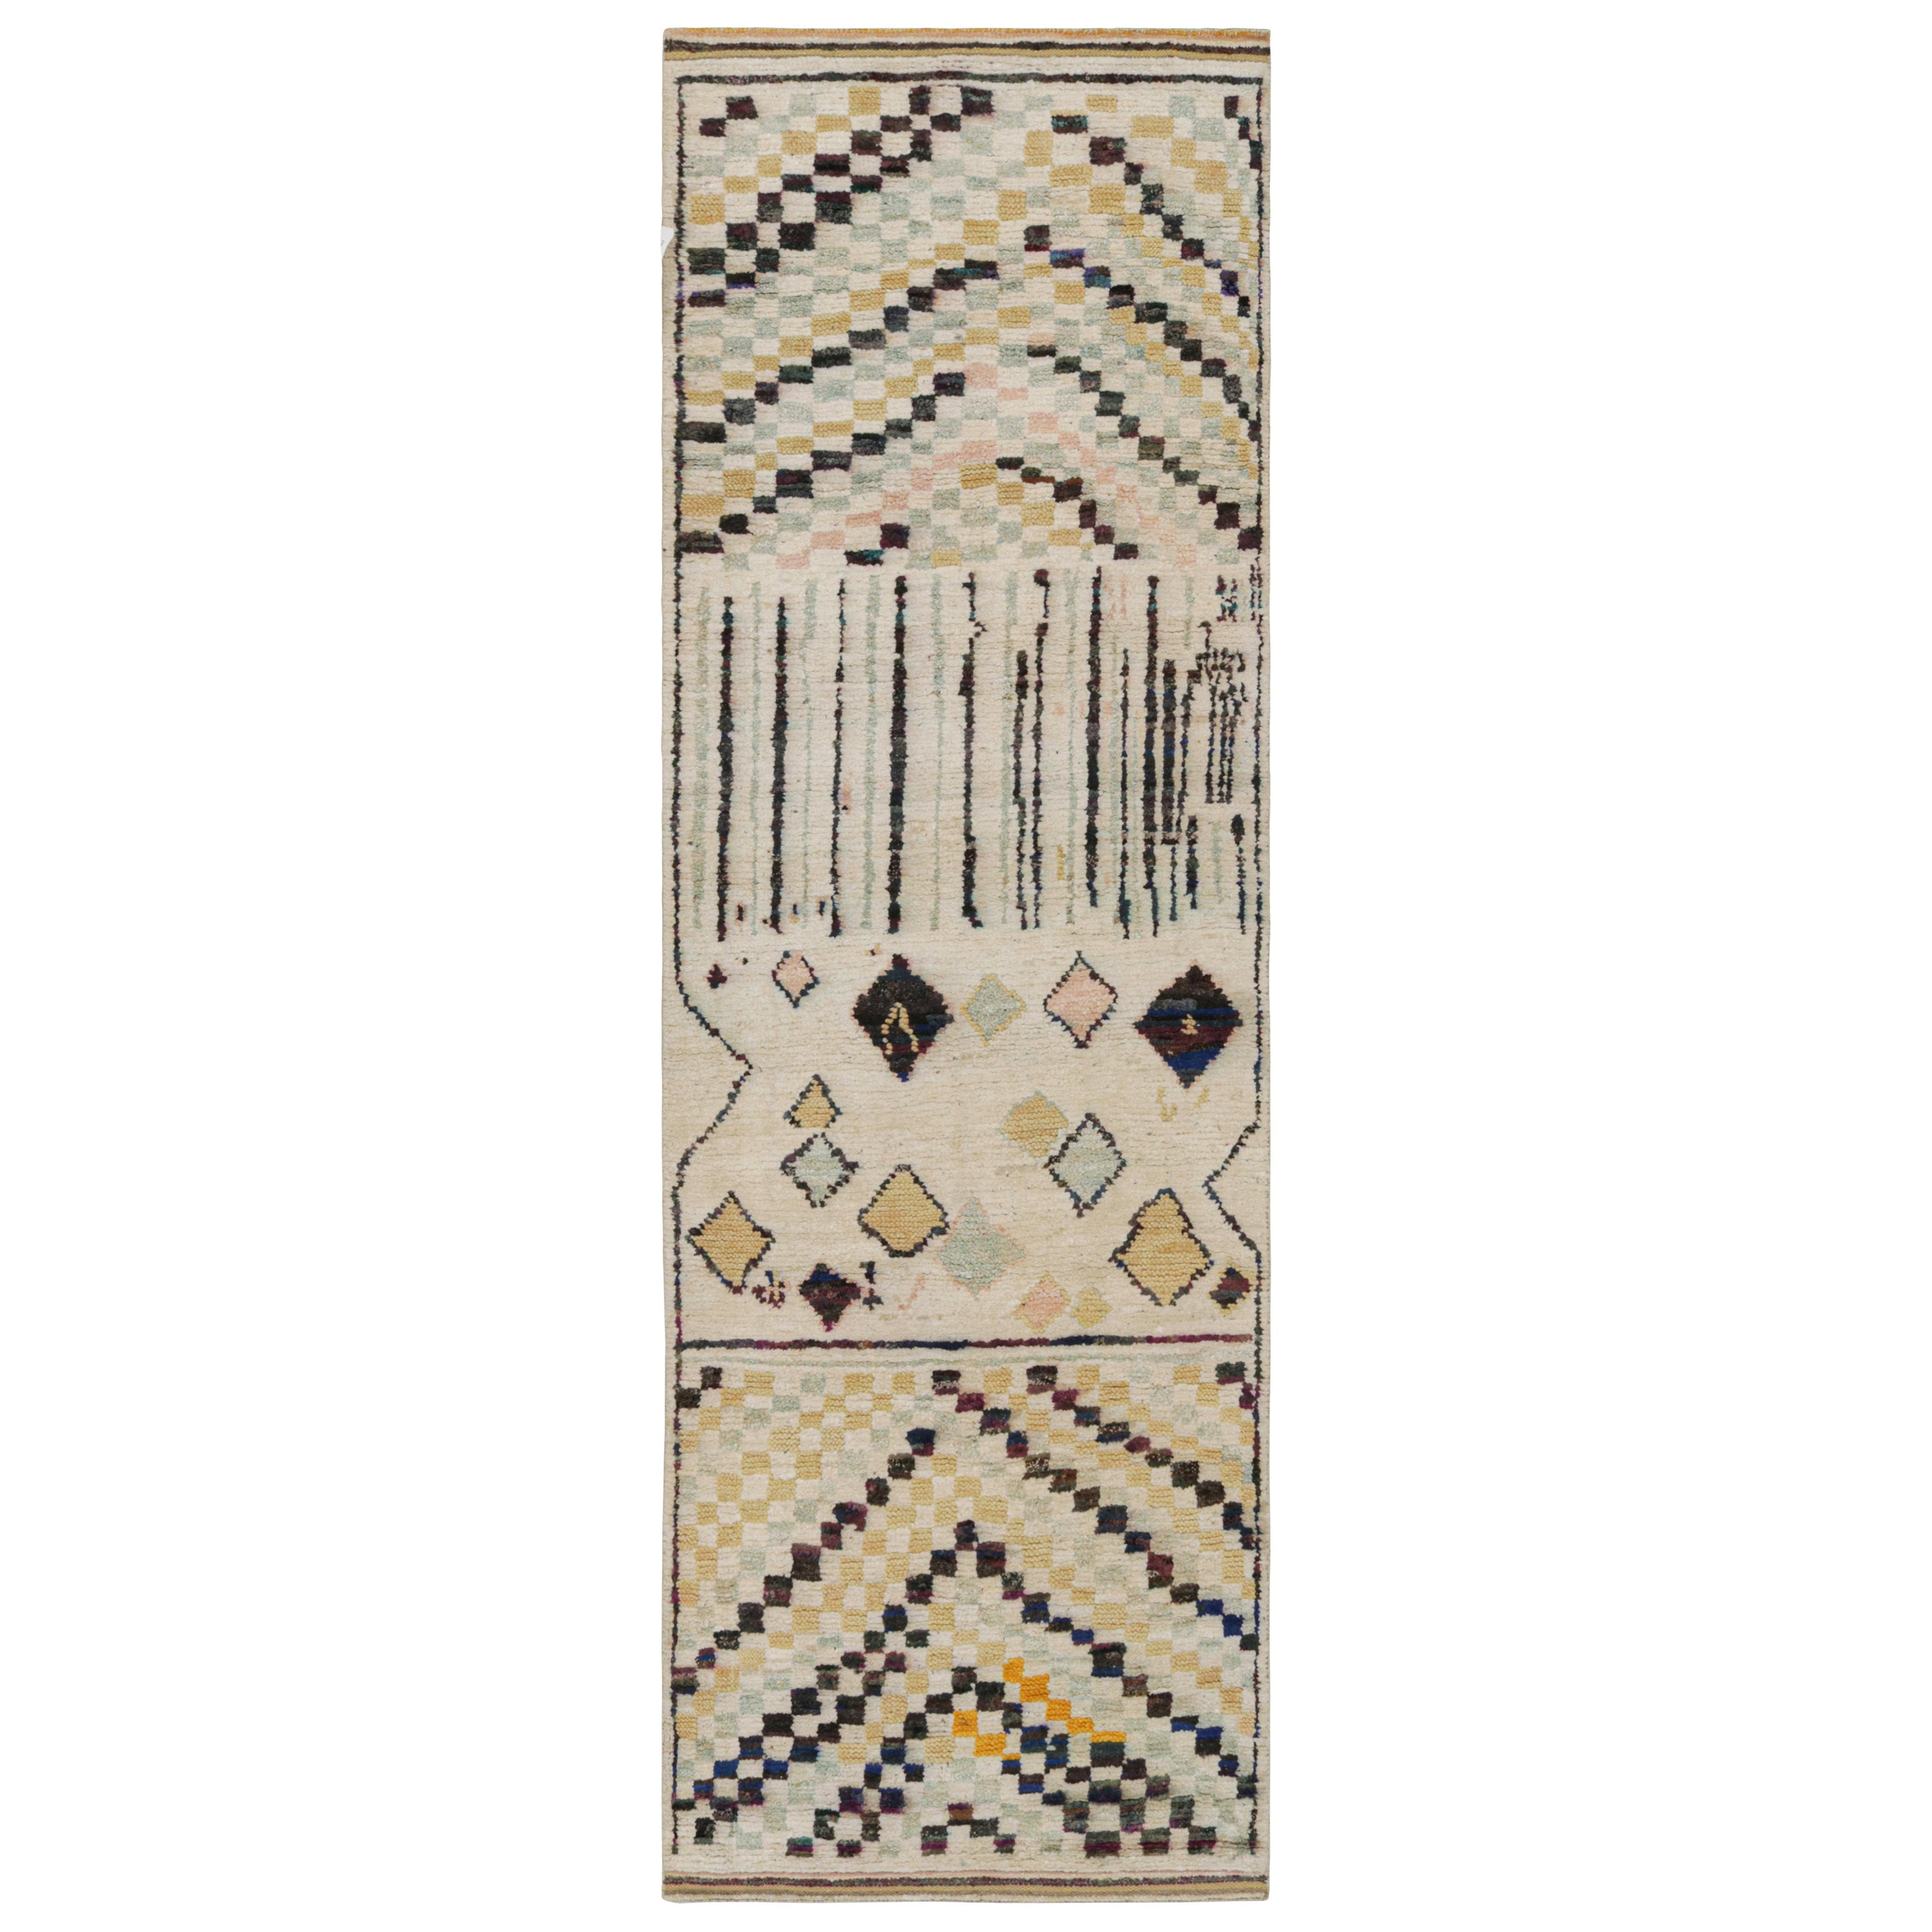 Rug & Kilim’s Moroccan Style Runner Rug in Beige & Multicolor Geometric Patterns For Sale